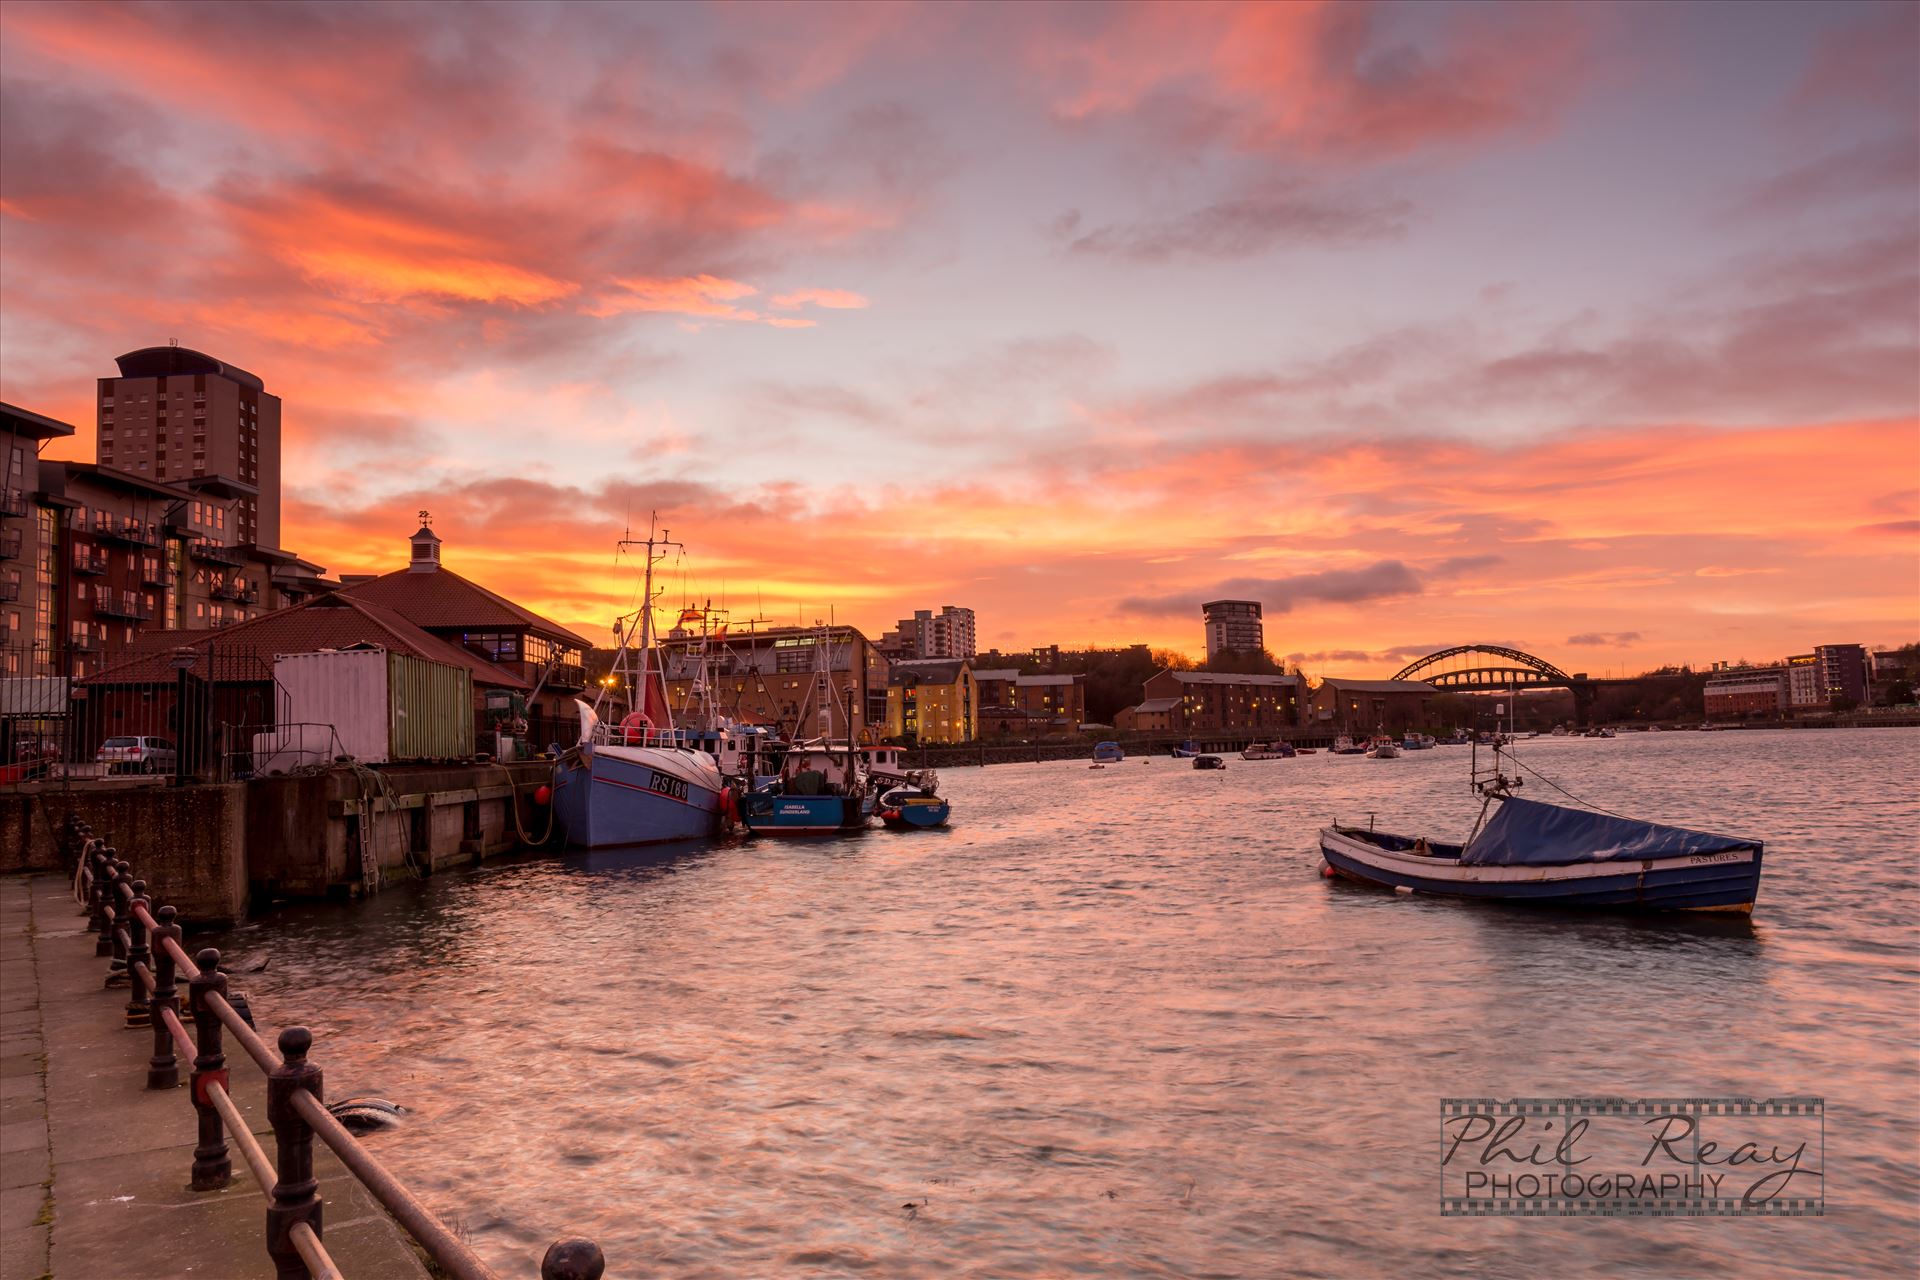 Sun sets over Sunderland - A fabulous sunset at Sunderland Fish Quay by philreay